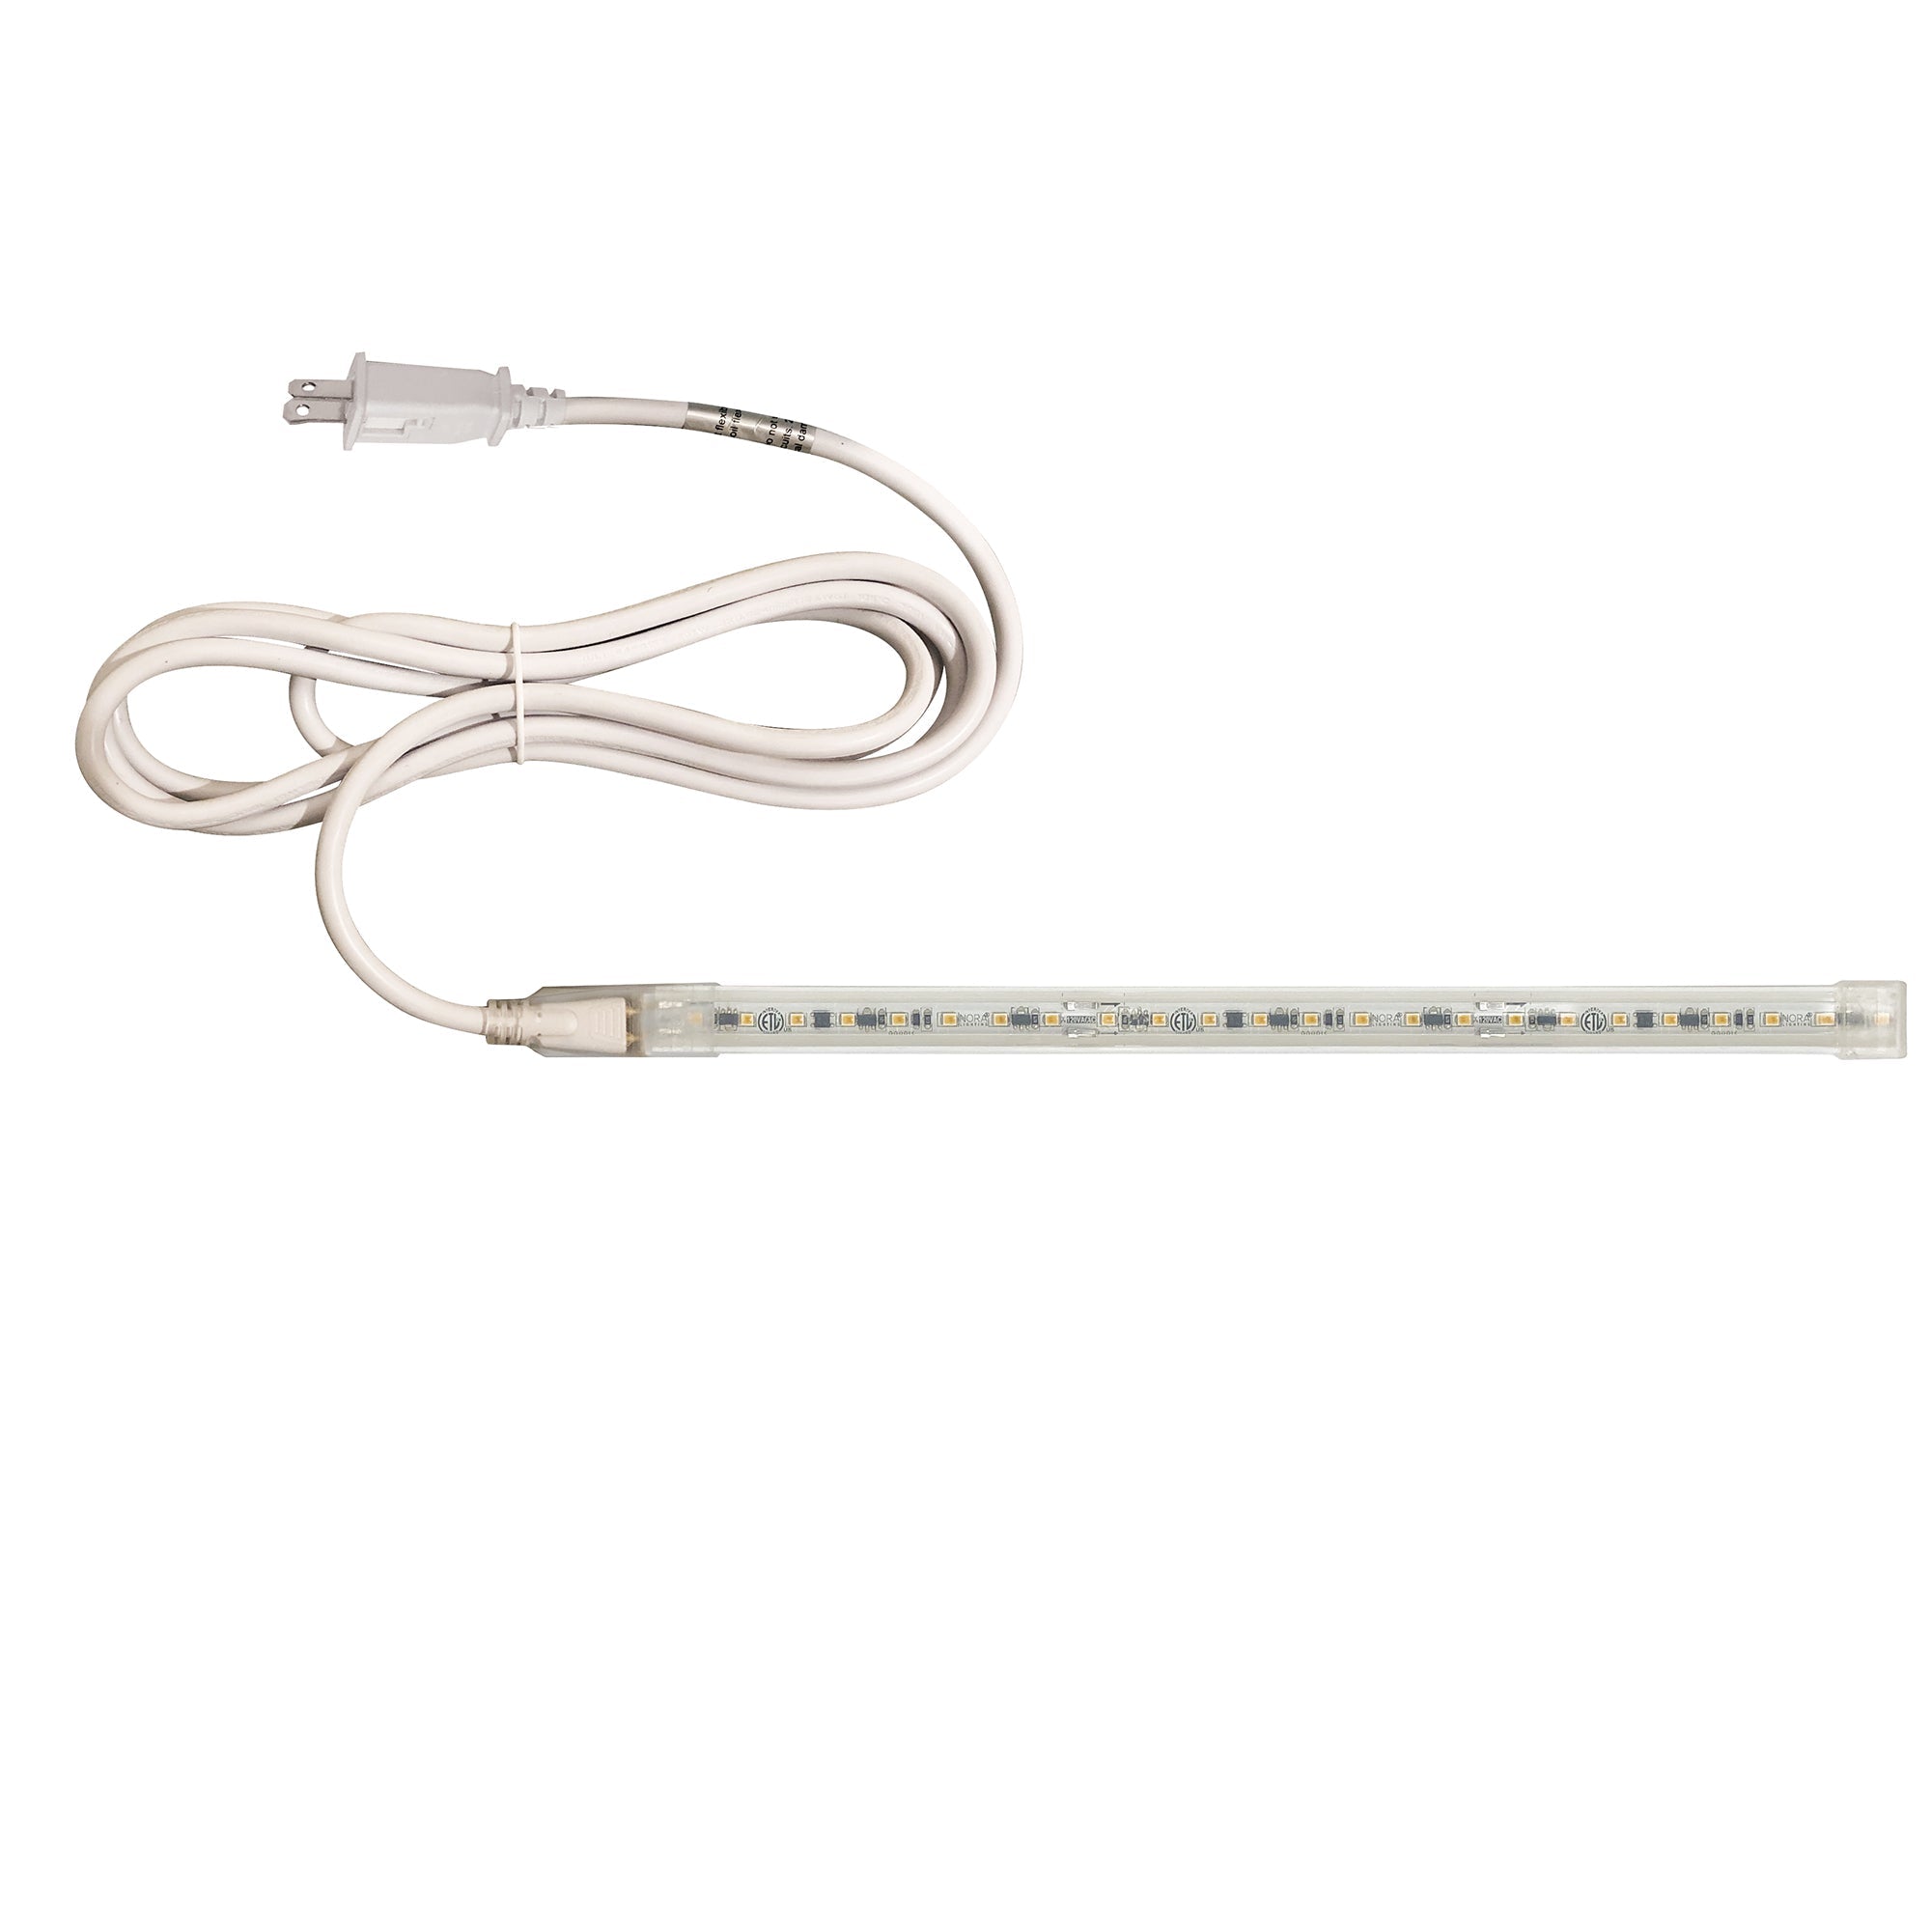 Nora Lighting NUTP13-W12-4-12-930/CP - Accent / Undercabinet - Custom Cut 12-ft, 4-in 120V Continuous LED Tape Light, 330lm / 3.6W per foot, 3000K, w/ Mounting Clips and 8' Cord & Plug